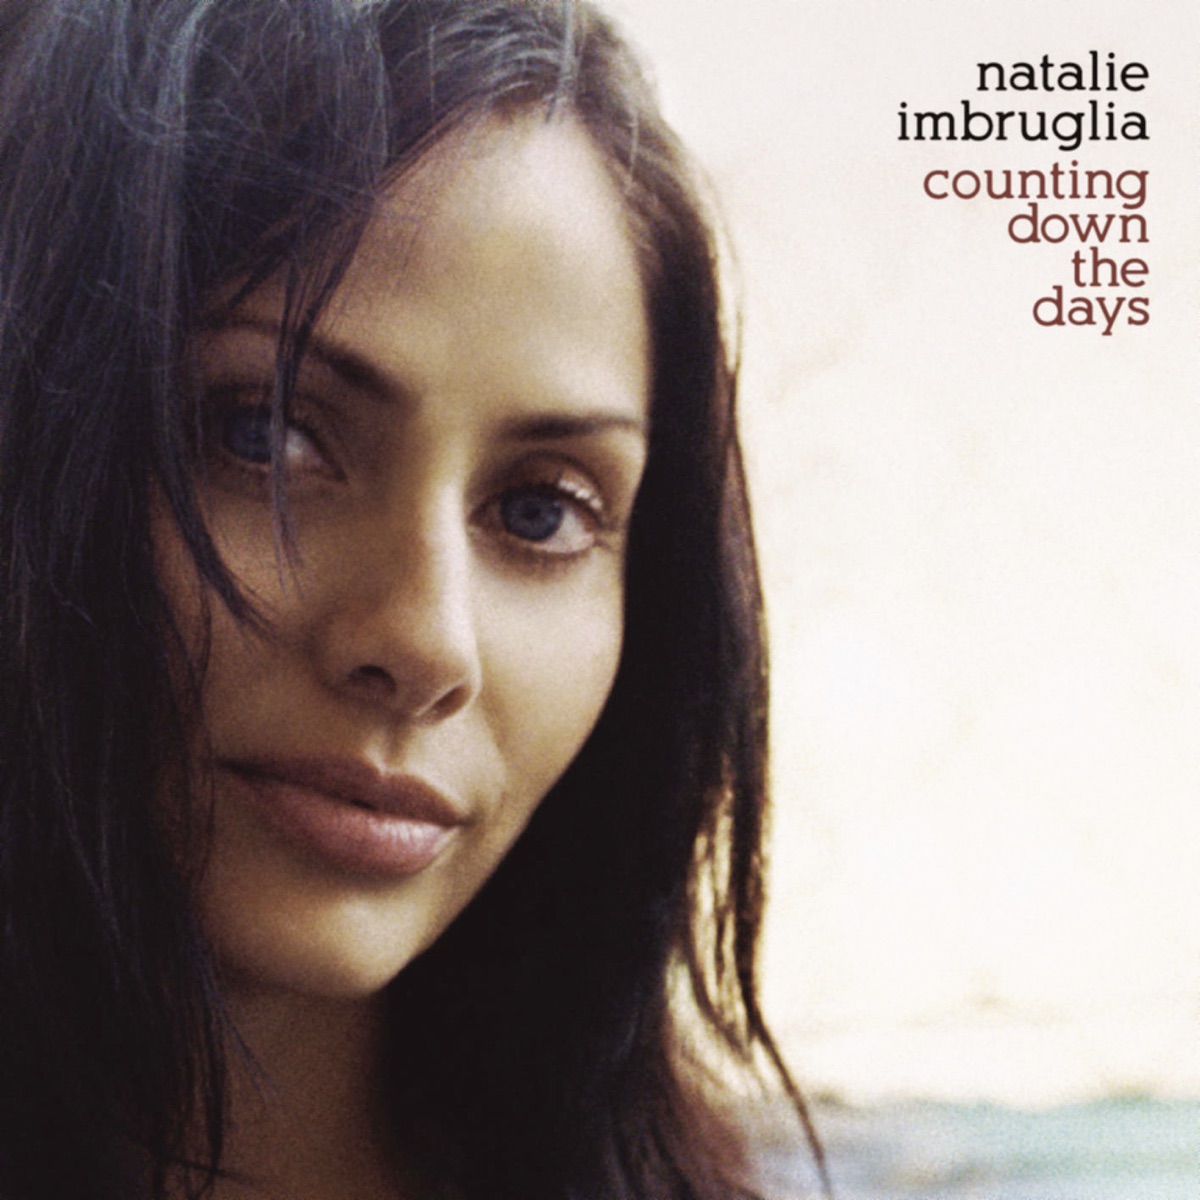 Counting Down The Days By Natalie Imbruglia On Apple Music